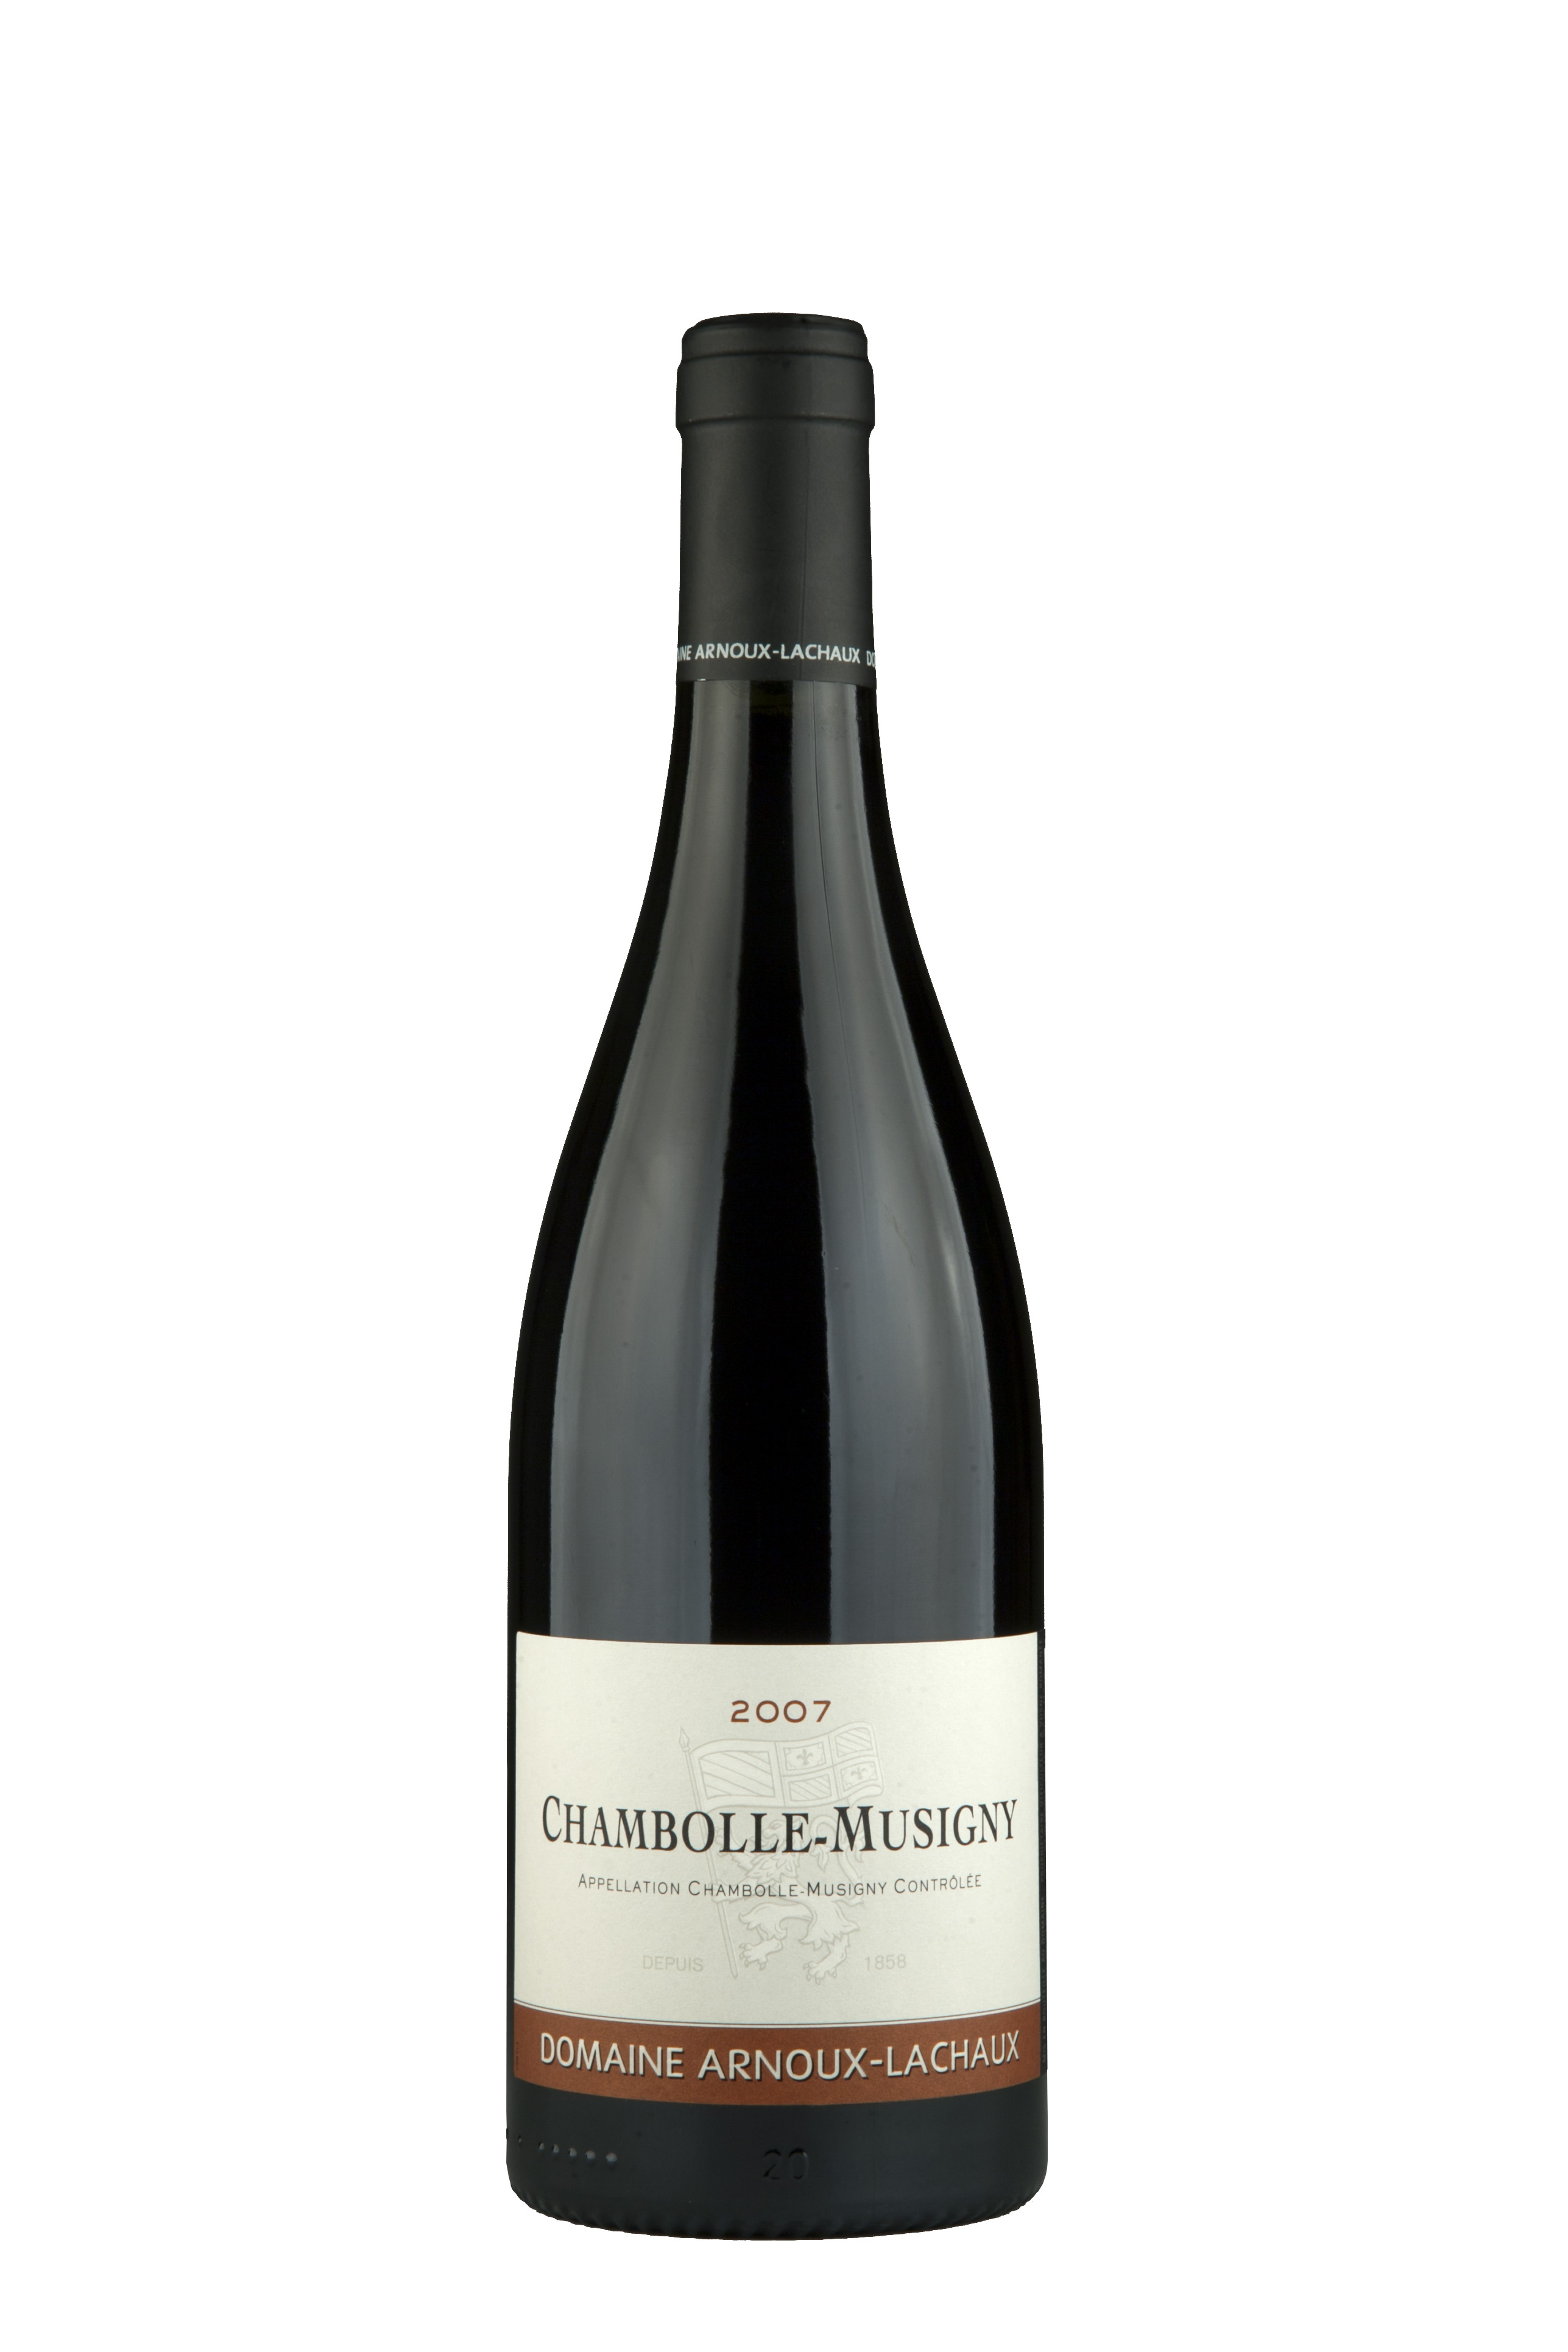 Chambolle-Musigny Domaine Arnoux Lachaux 2007